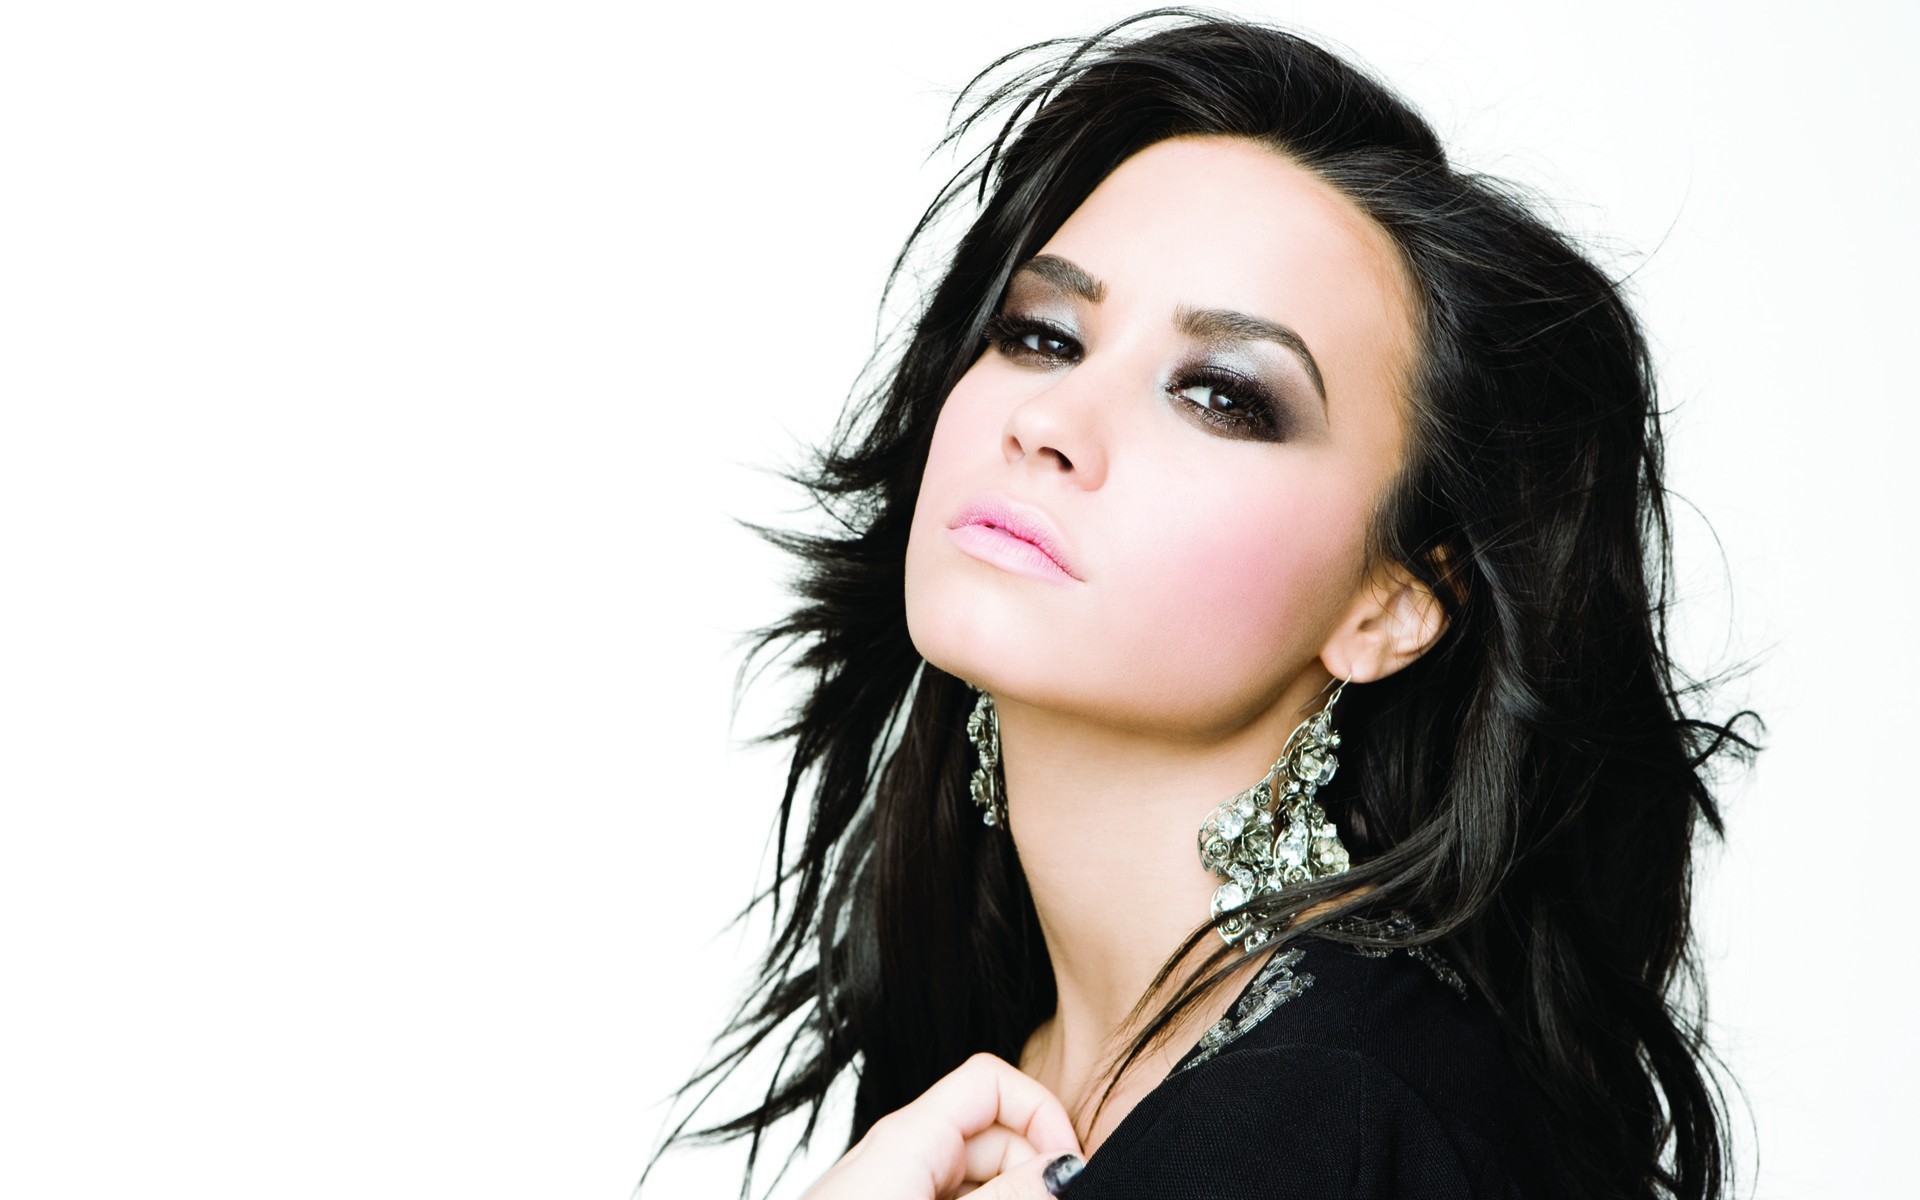 Wallpapers woman Demi Lovato hairstyle on the desktop